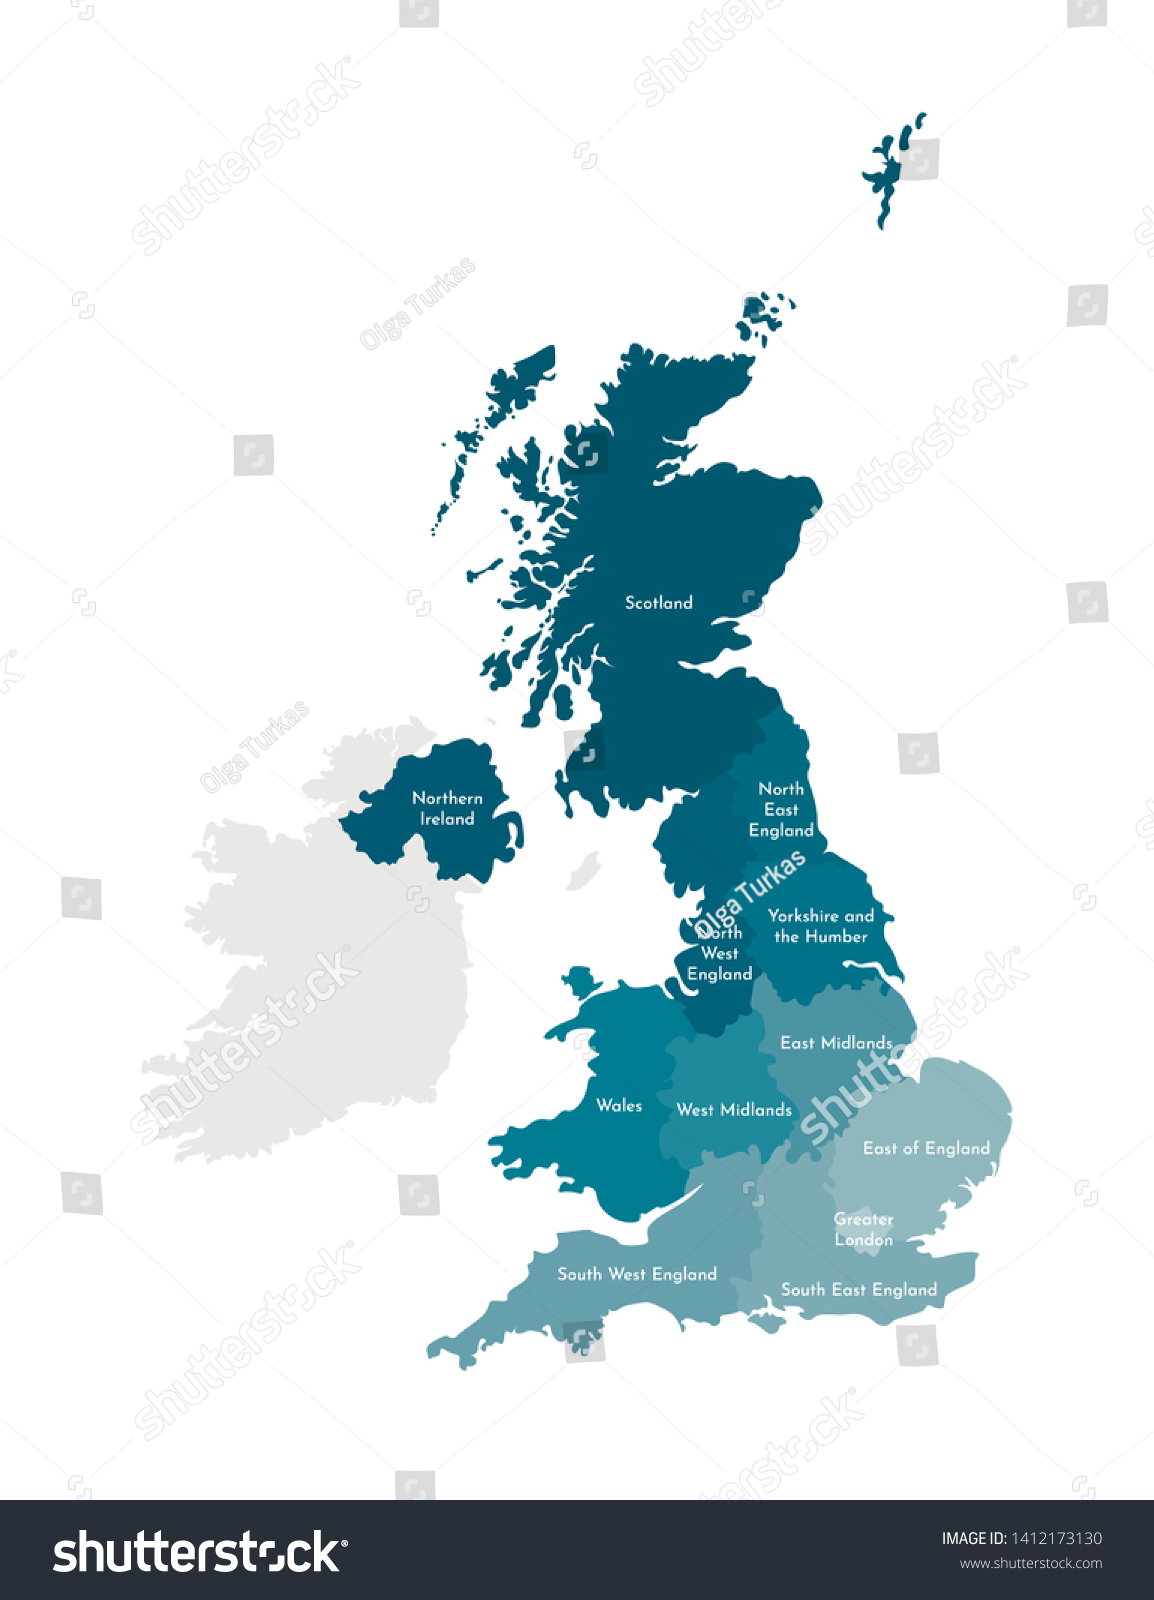 SVG of Vector isolated illustration of simplified administrative map of the United Kingdom of Great Britain and Northern Ireland. Borders and names of the regions. Colorful blue khaki silhouettes svg